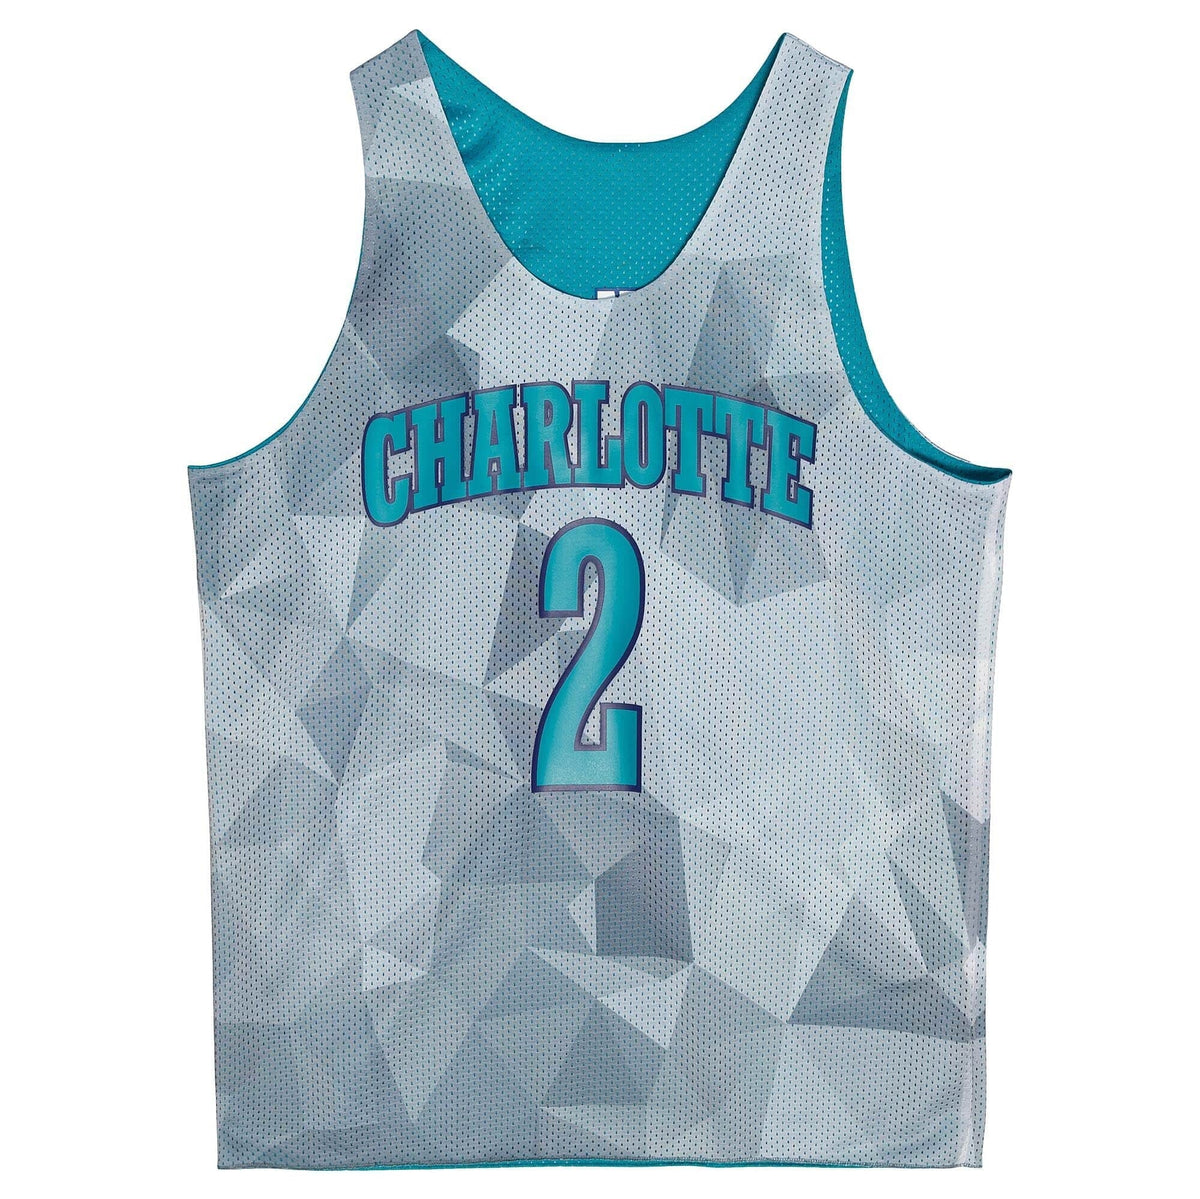 WHITE AND BLACK REVERSIBLE HORNETS JERSEY